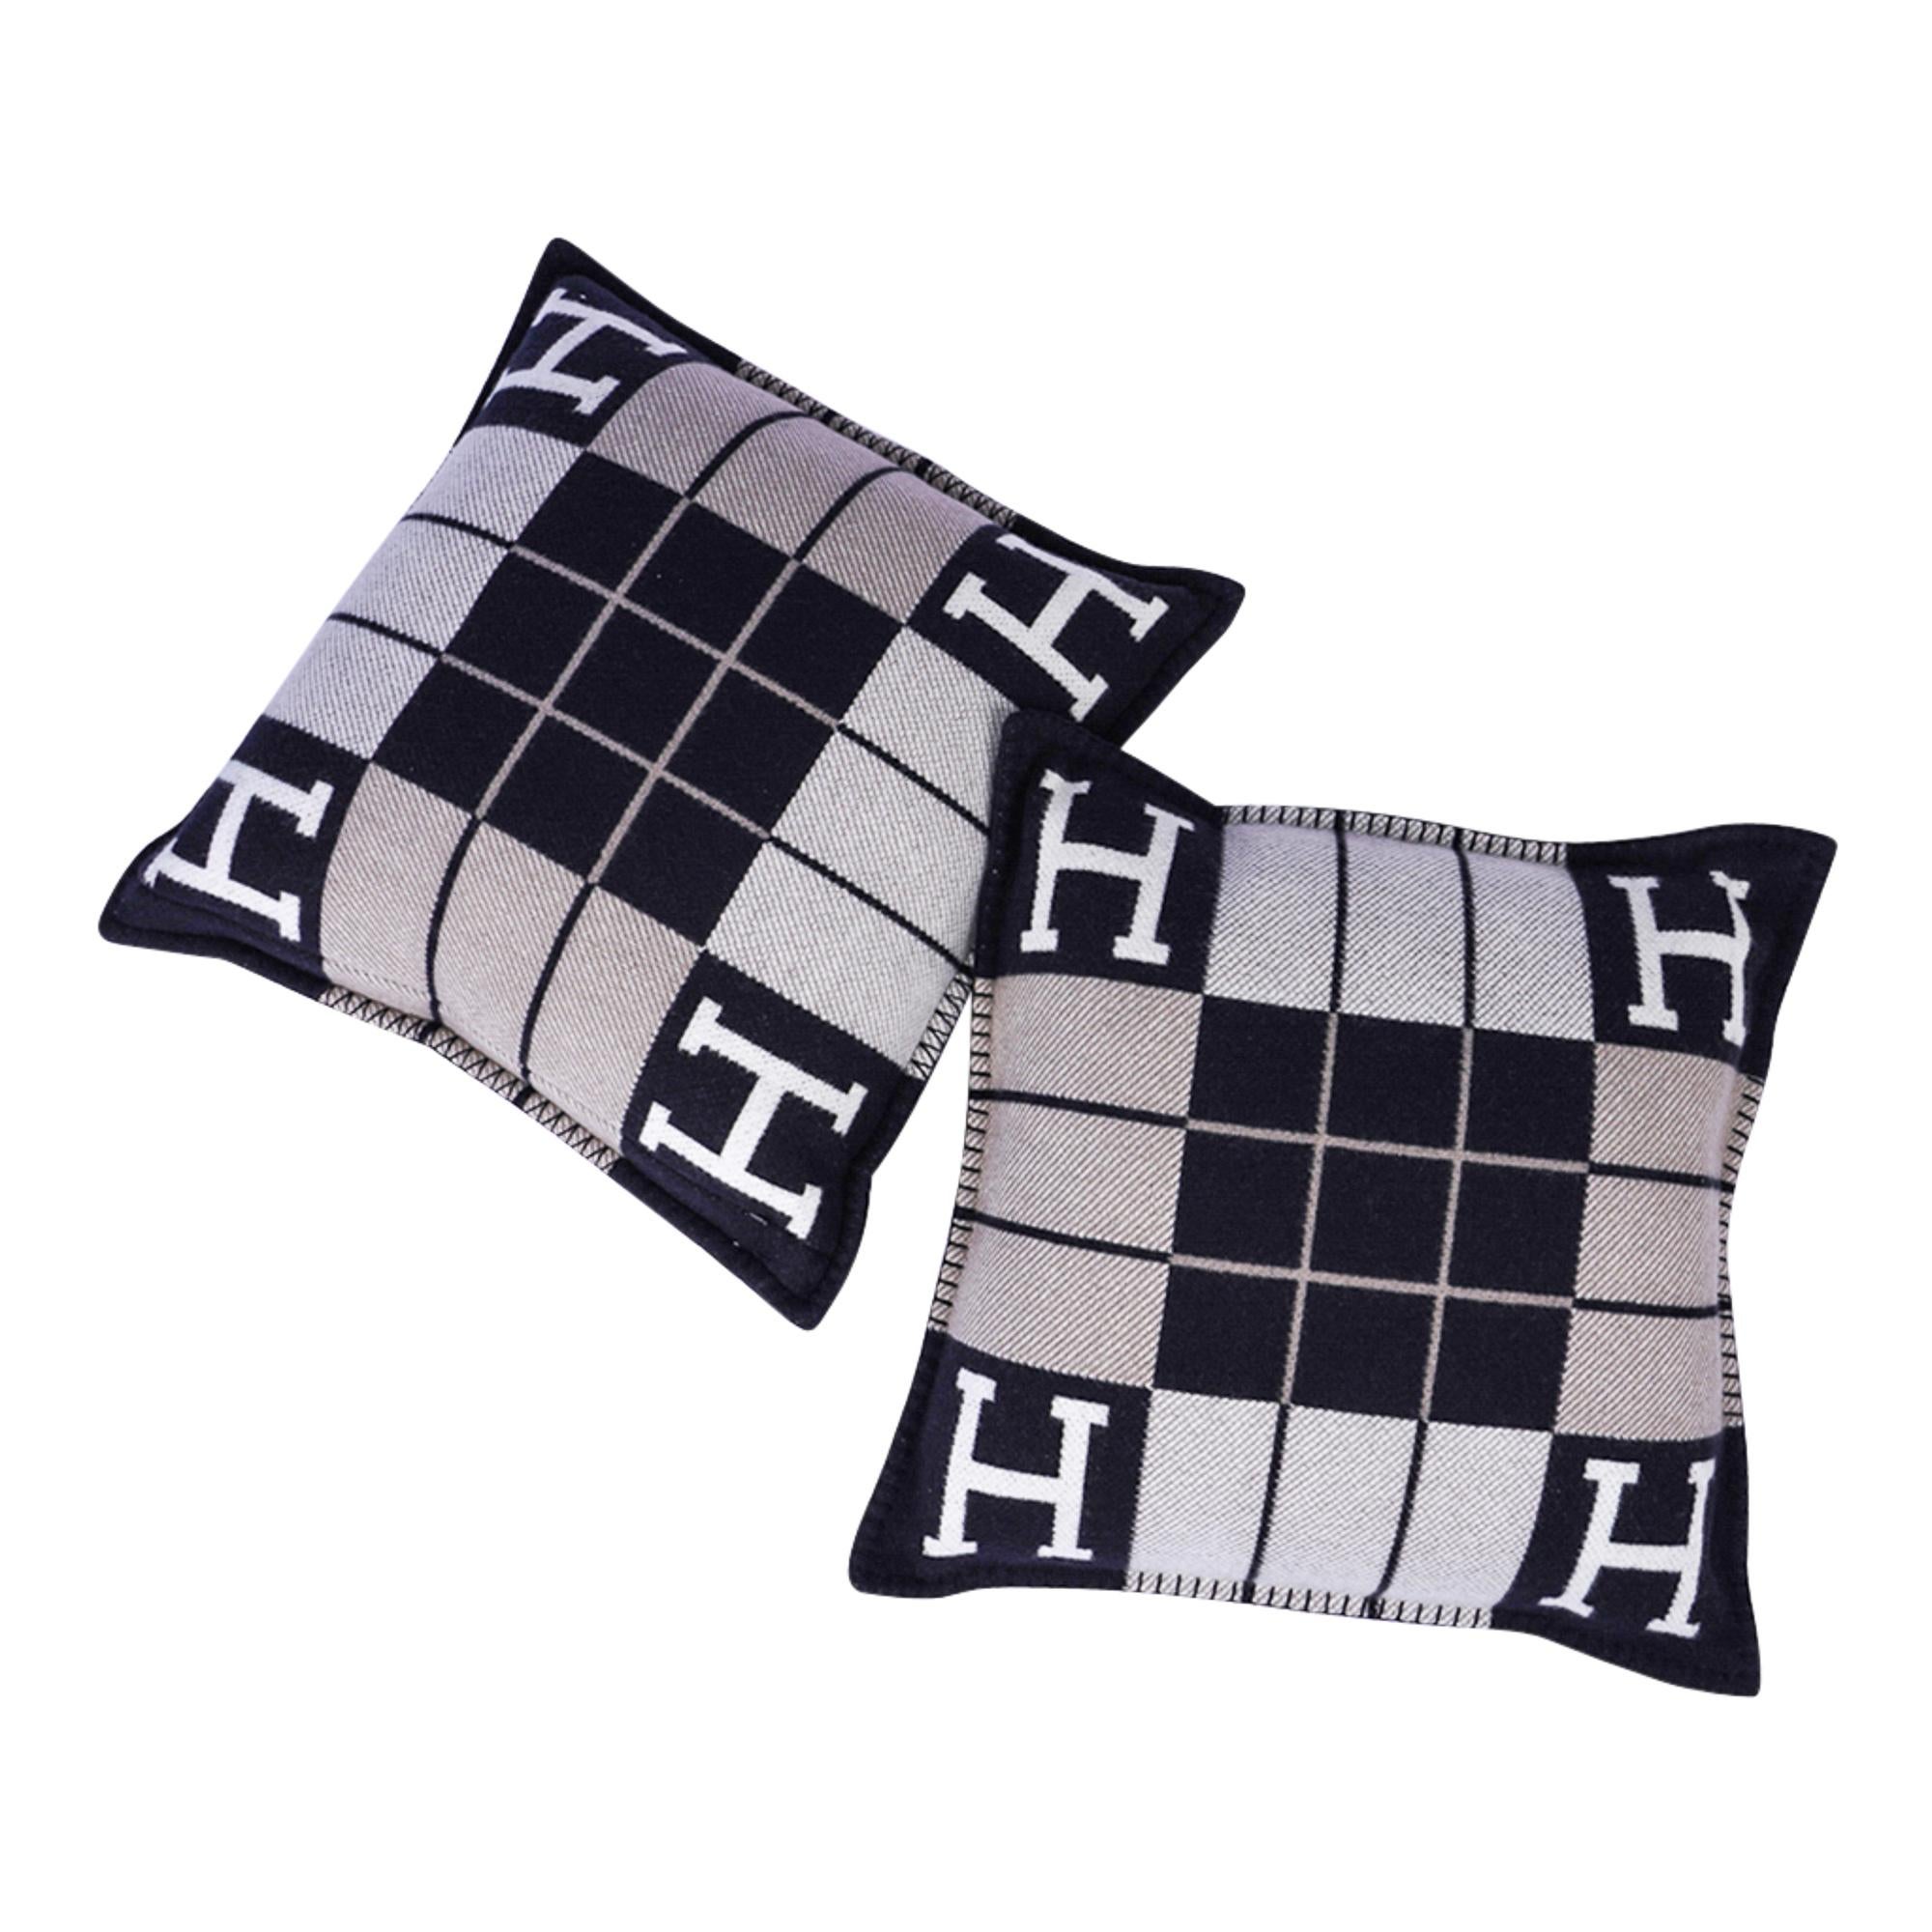 Guaranteed authentic Hermes classic Small Model Avalon III signature H pillow featured in Black and Ecru.
The removable cover is created from 90% Wool and 10% cashmere and has whip stitch edges.
New or Pristine Store Fresh Condition. 
final